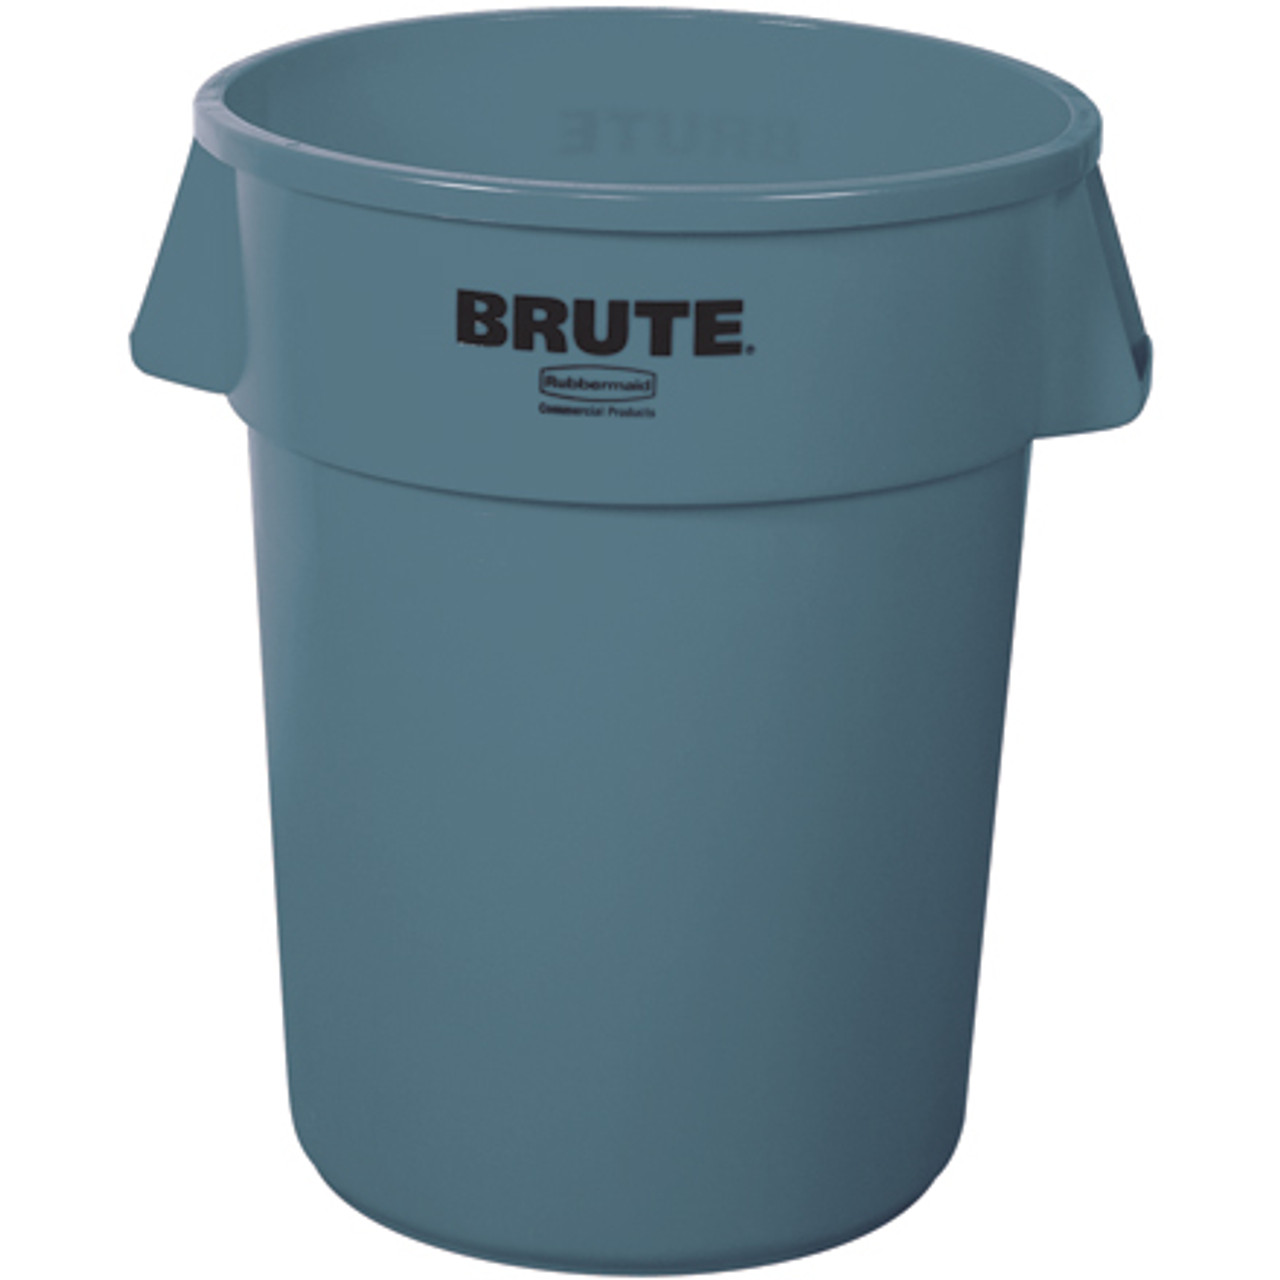 https://cdn11.bigcommerce.com/s-vxsr4nt/images/stencil/1280x1280/products/53579/24345/Brute_Heavy_Duty_Trash_Can_Containers_Gray__66064.1559836297.jpg?c=2